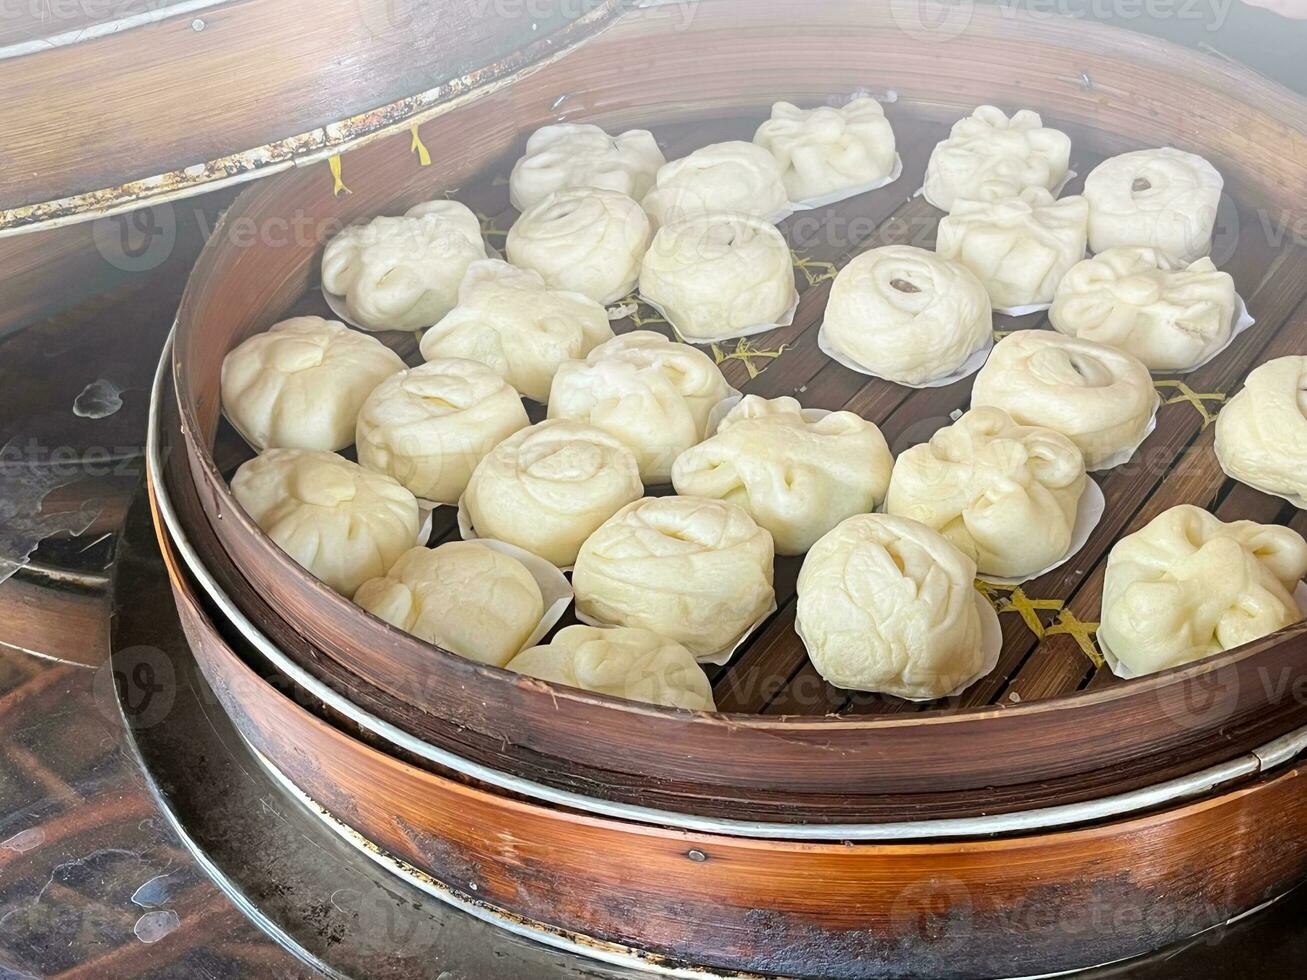 Bakpao, Baozi Steamed bun, pao, dim sum on In a bamboo steamer. a type of yeast-leavened filled bun in various Chinese cuisines. photo